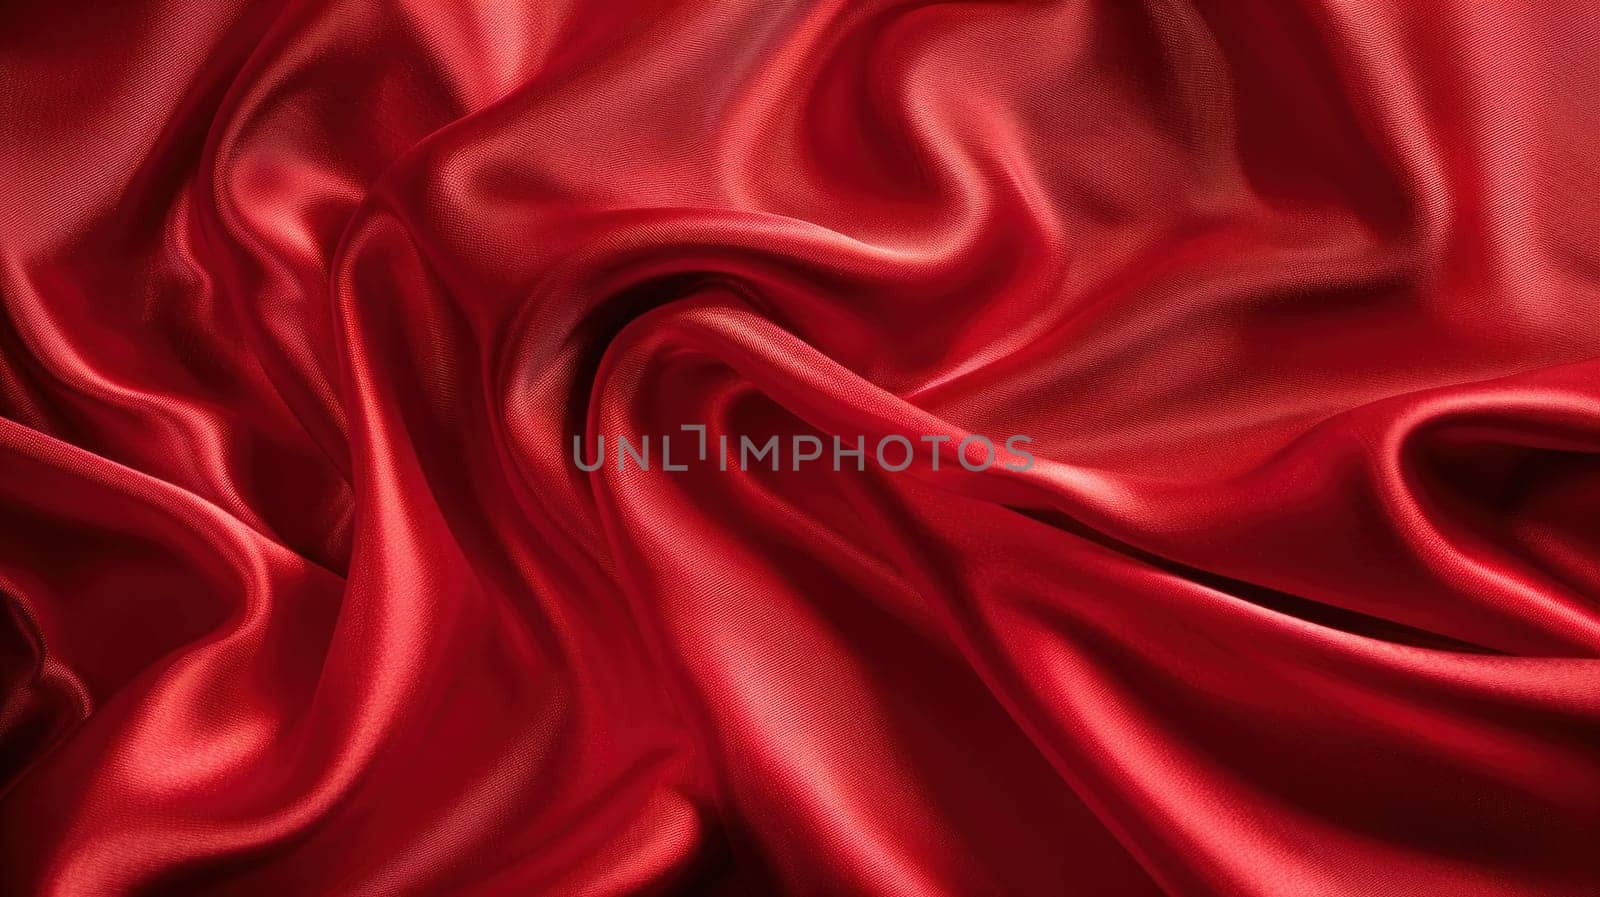 Elegant red satin fabric with beautiful folds for fashion and beauty design concept